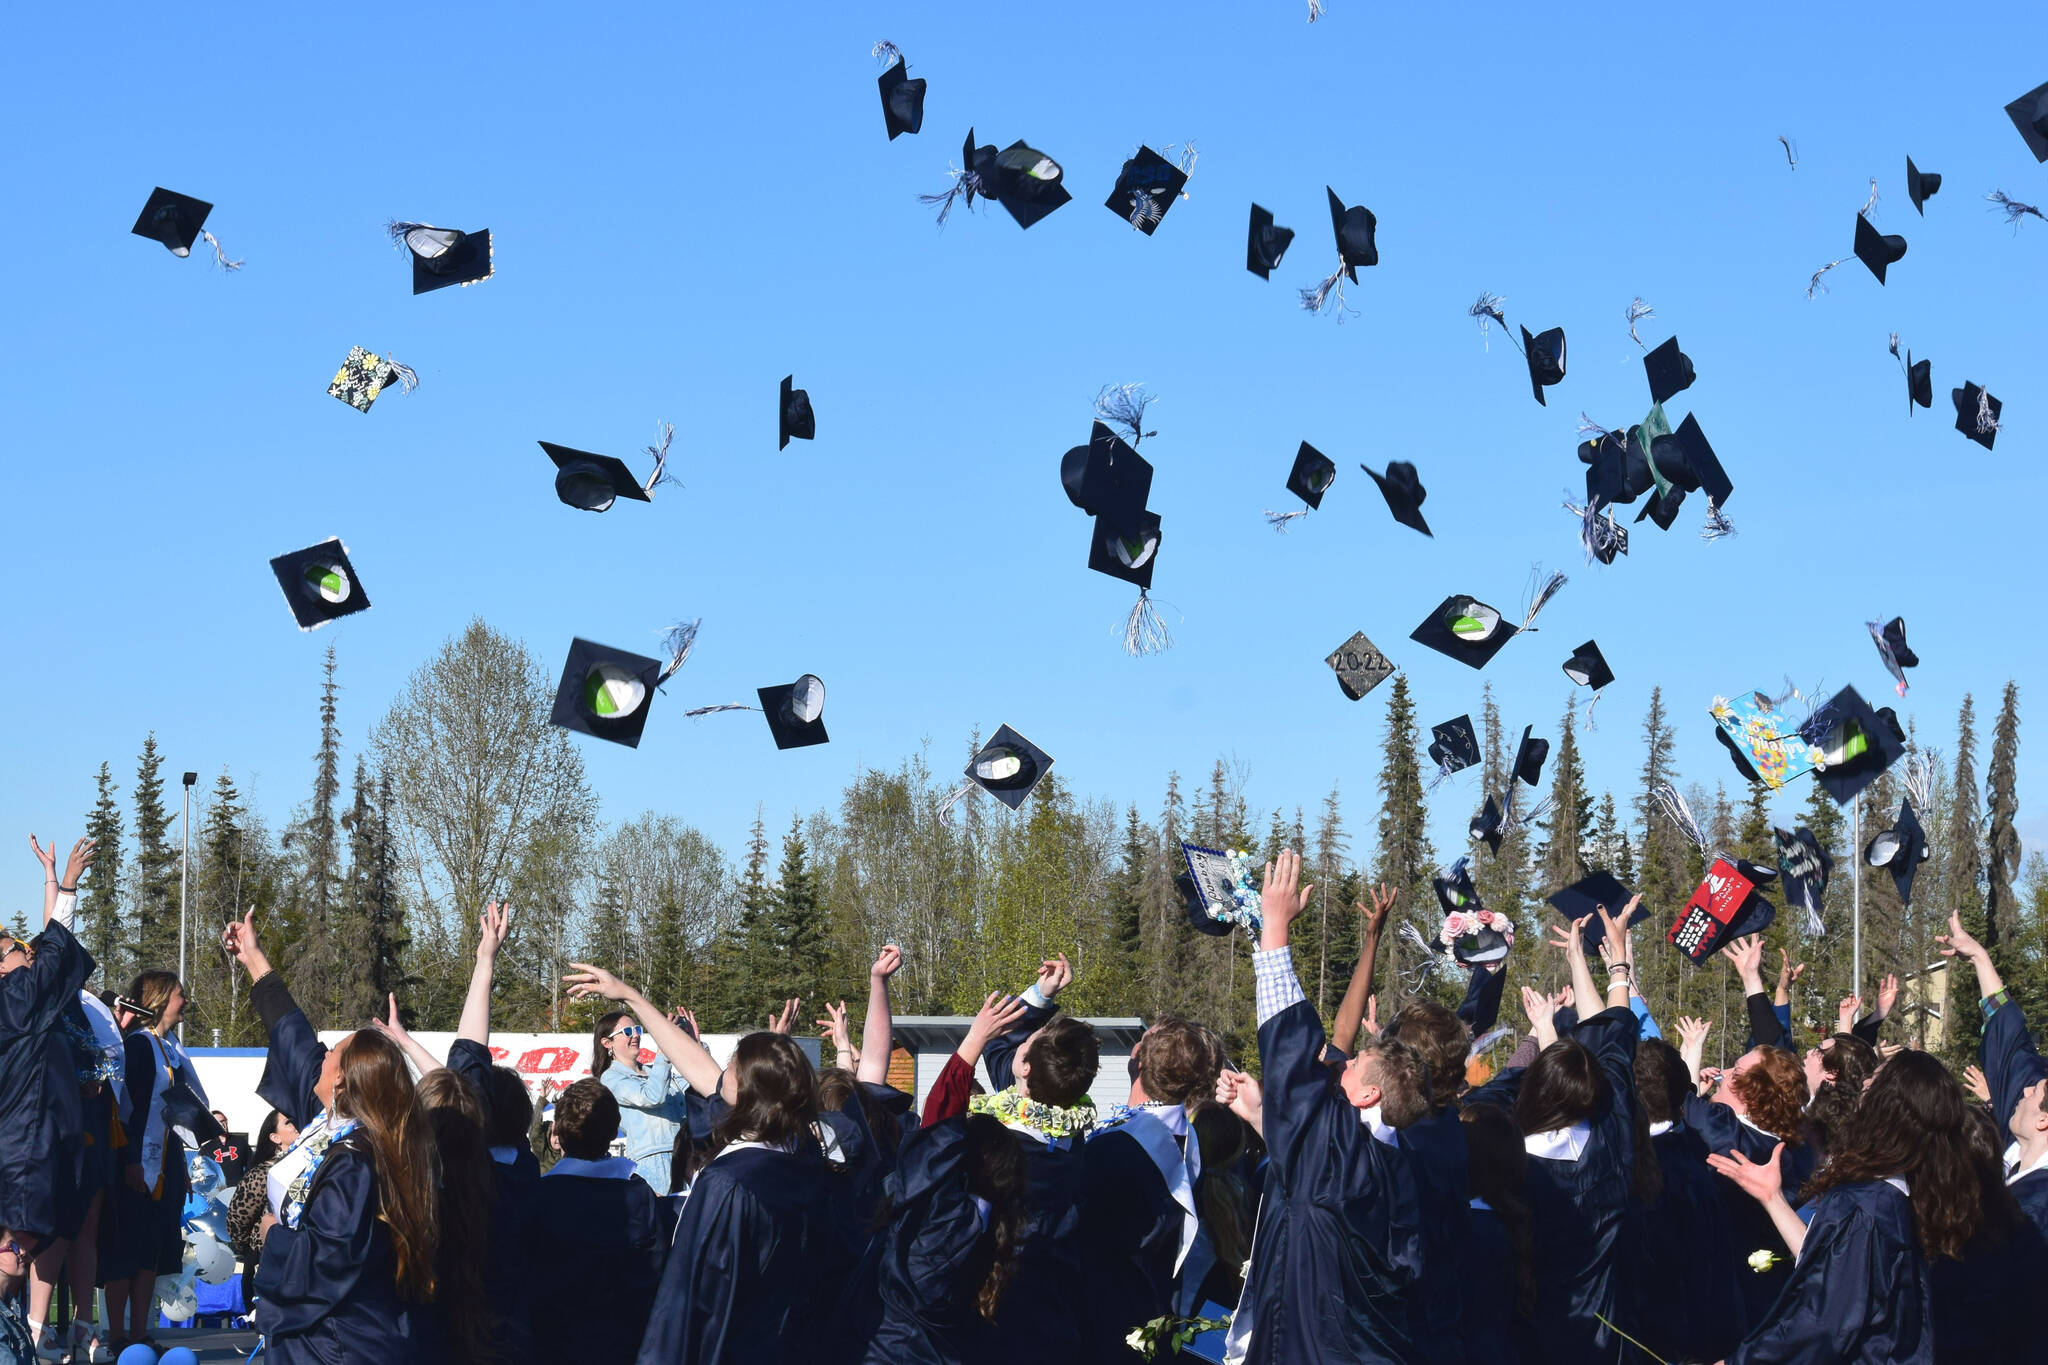 Graduates throw their caps into the air at the end of Soldotna High School’s commencement ceremony on Wednesday, May 18, 2022 in Soldotna, Alaska. (Ashlyn O’Hara/Peninsula Clarion)